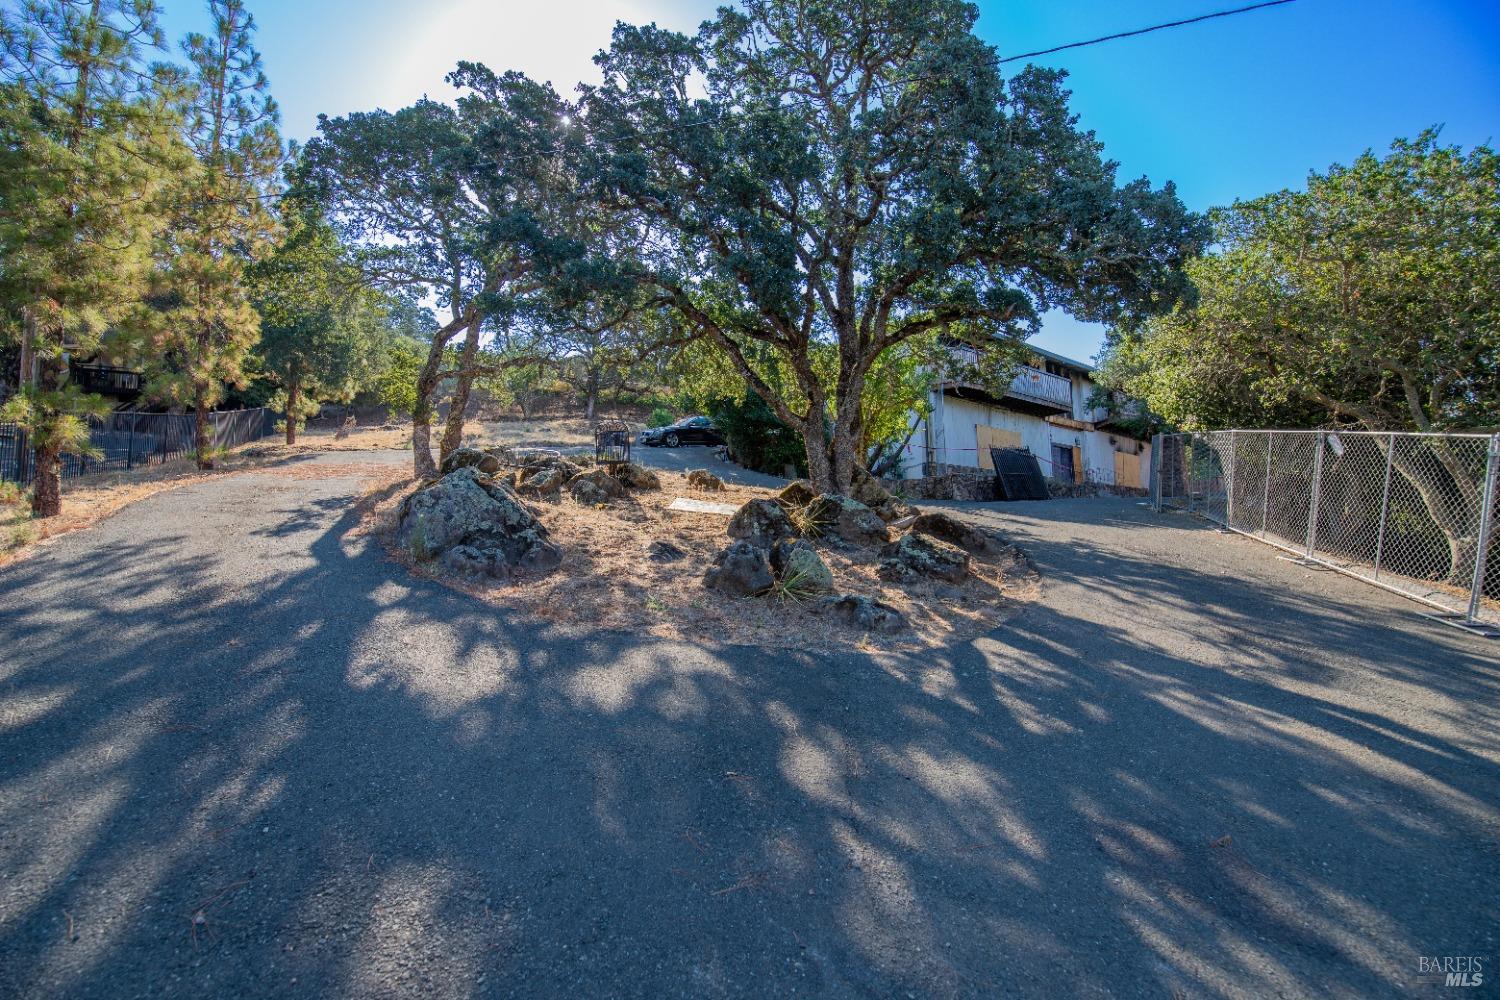 Photo of 4418 Green Valley Rd in Fairfield, CA